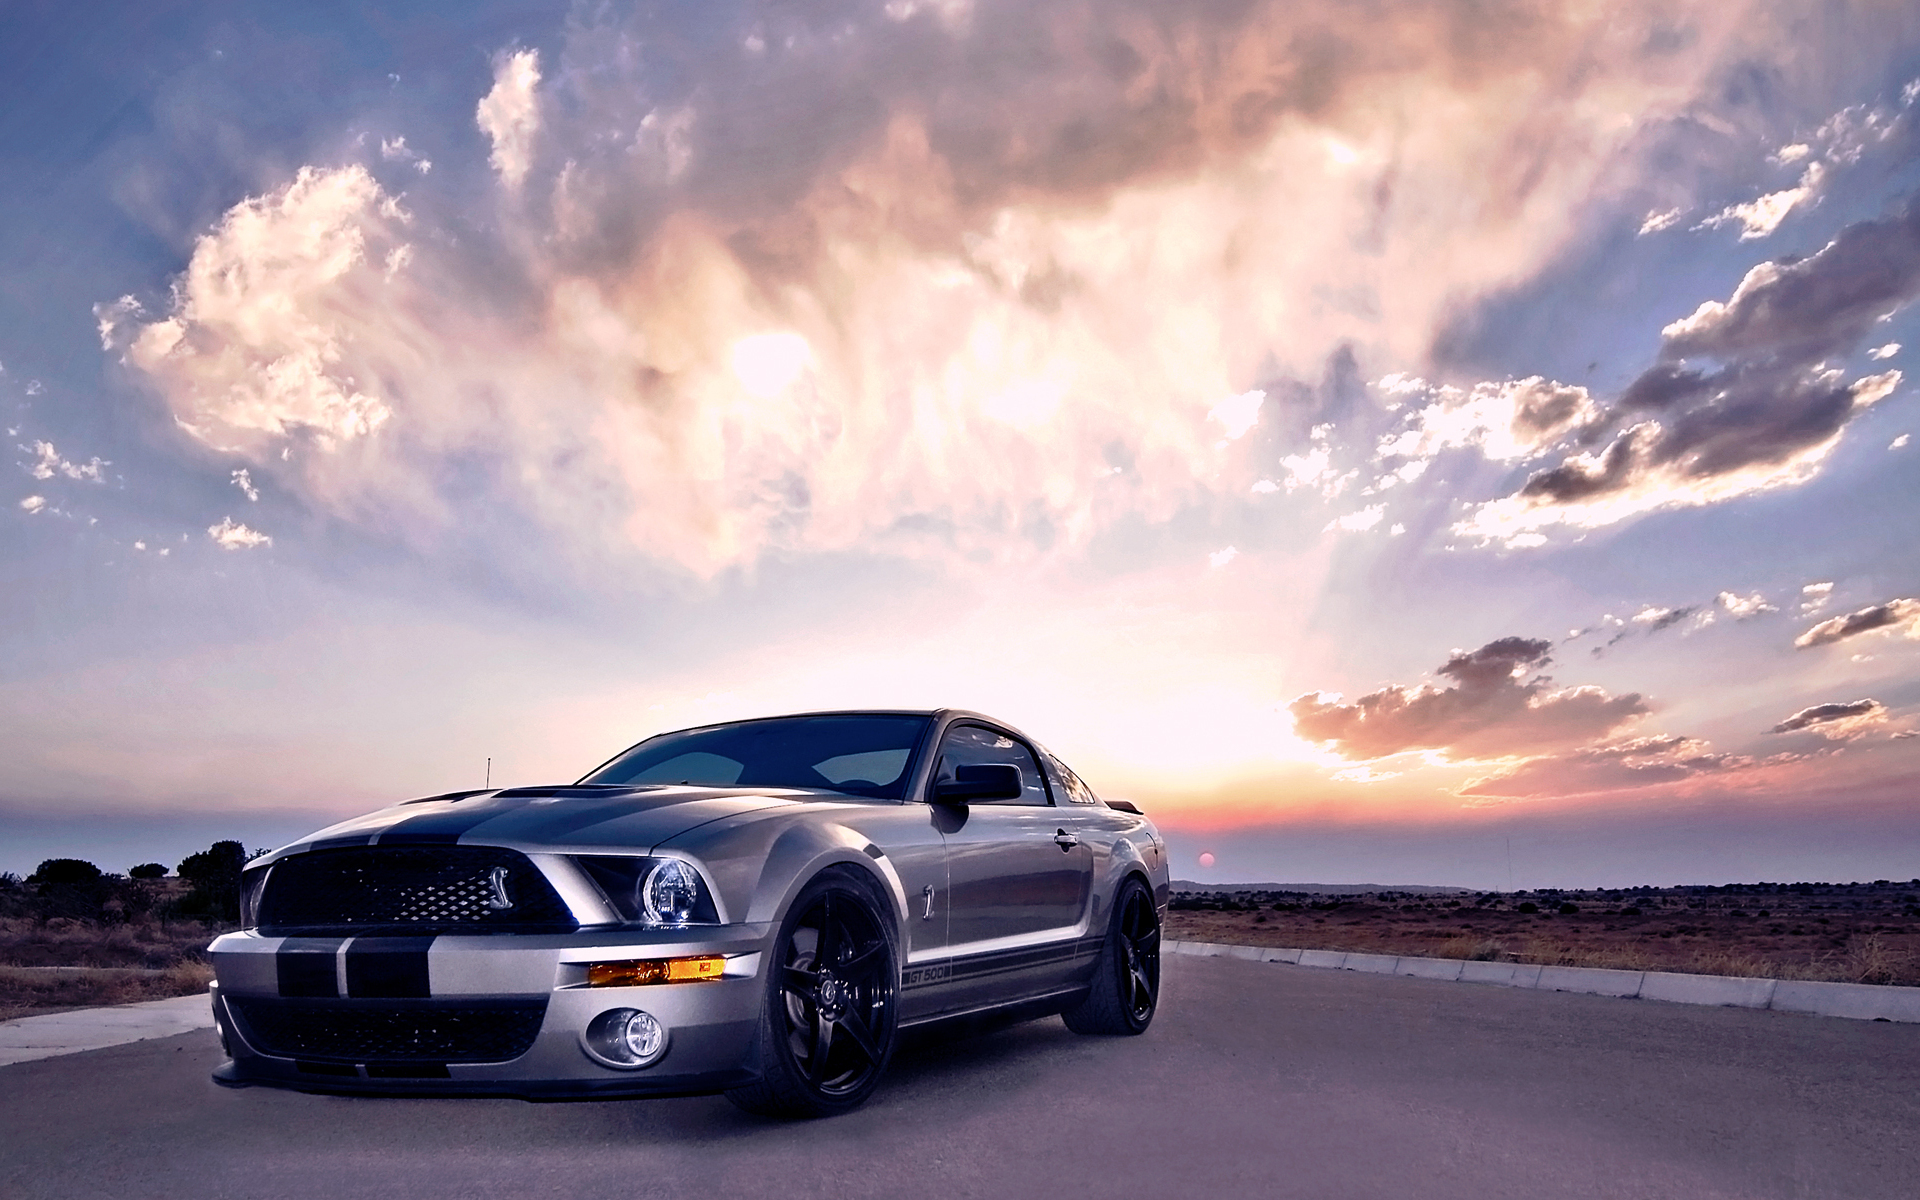 Shelby Cobra Wallpaper Android Phone With